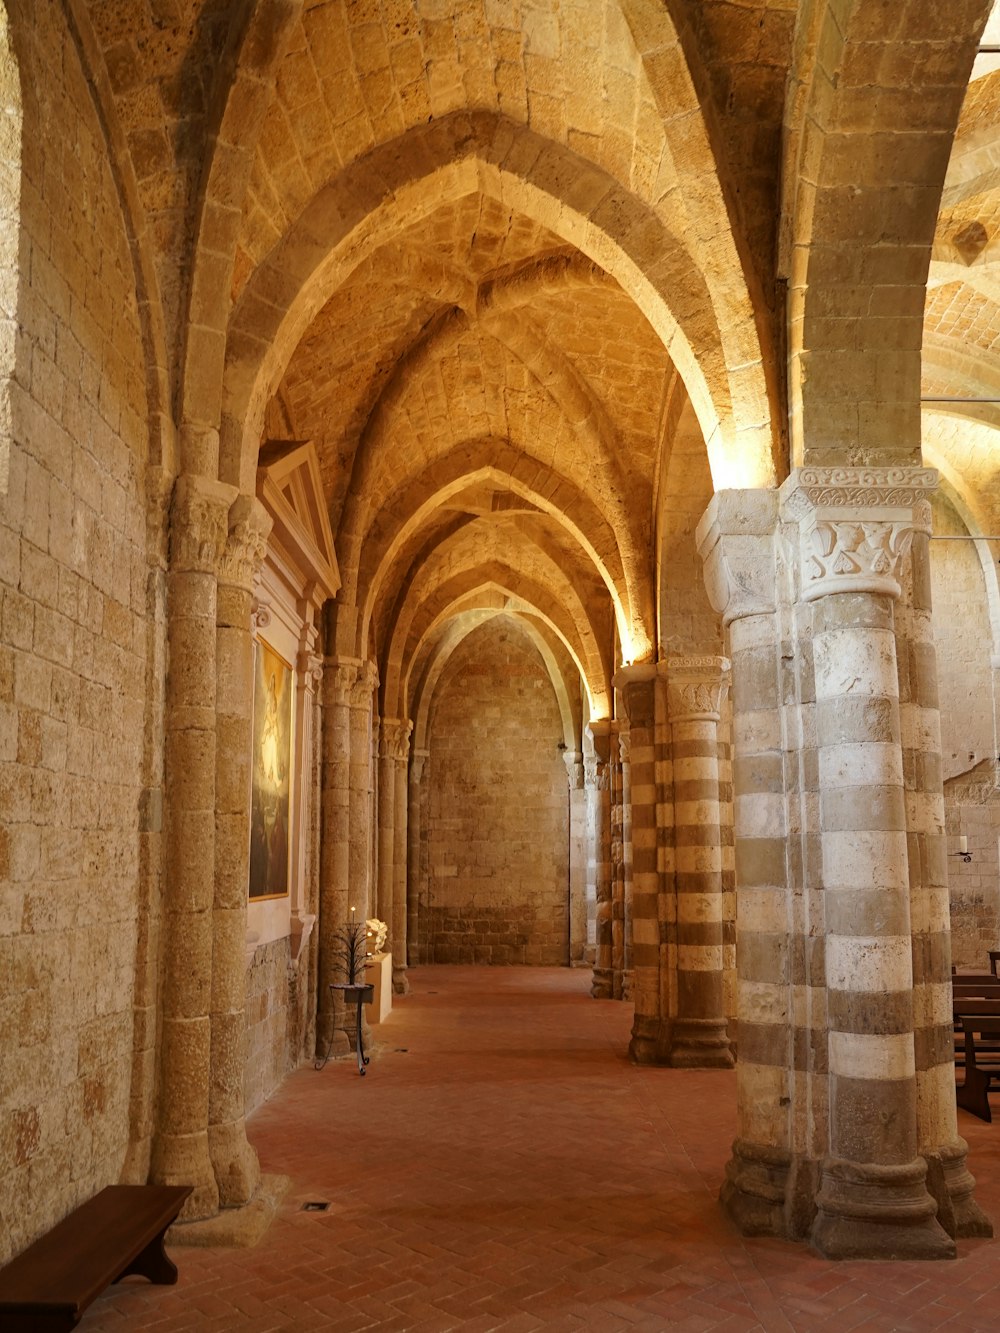 a long hallway with stone arches and benches